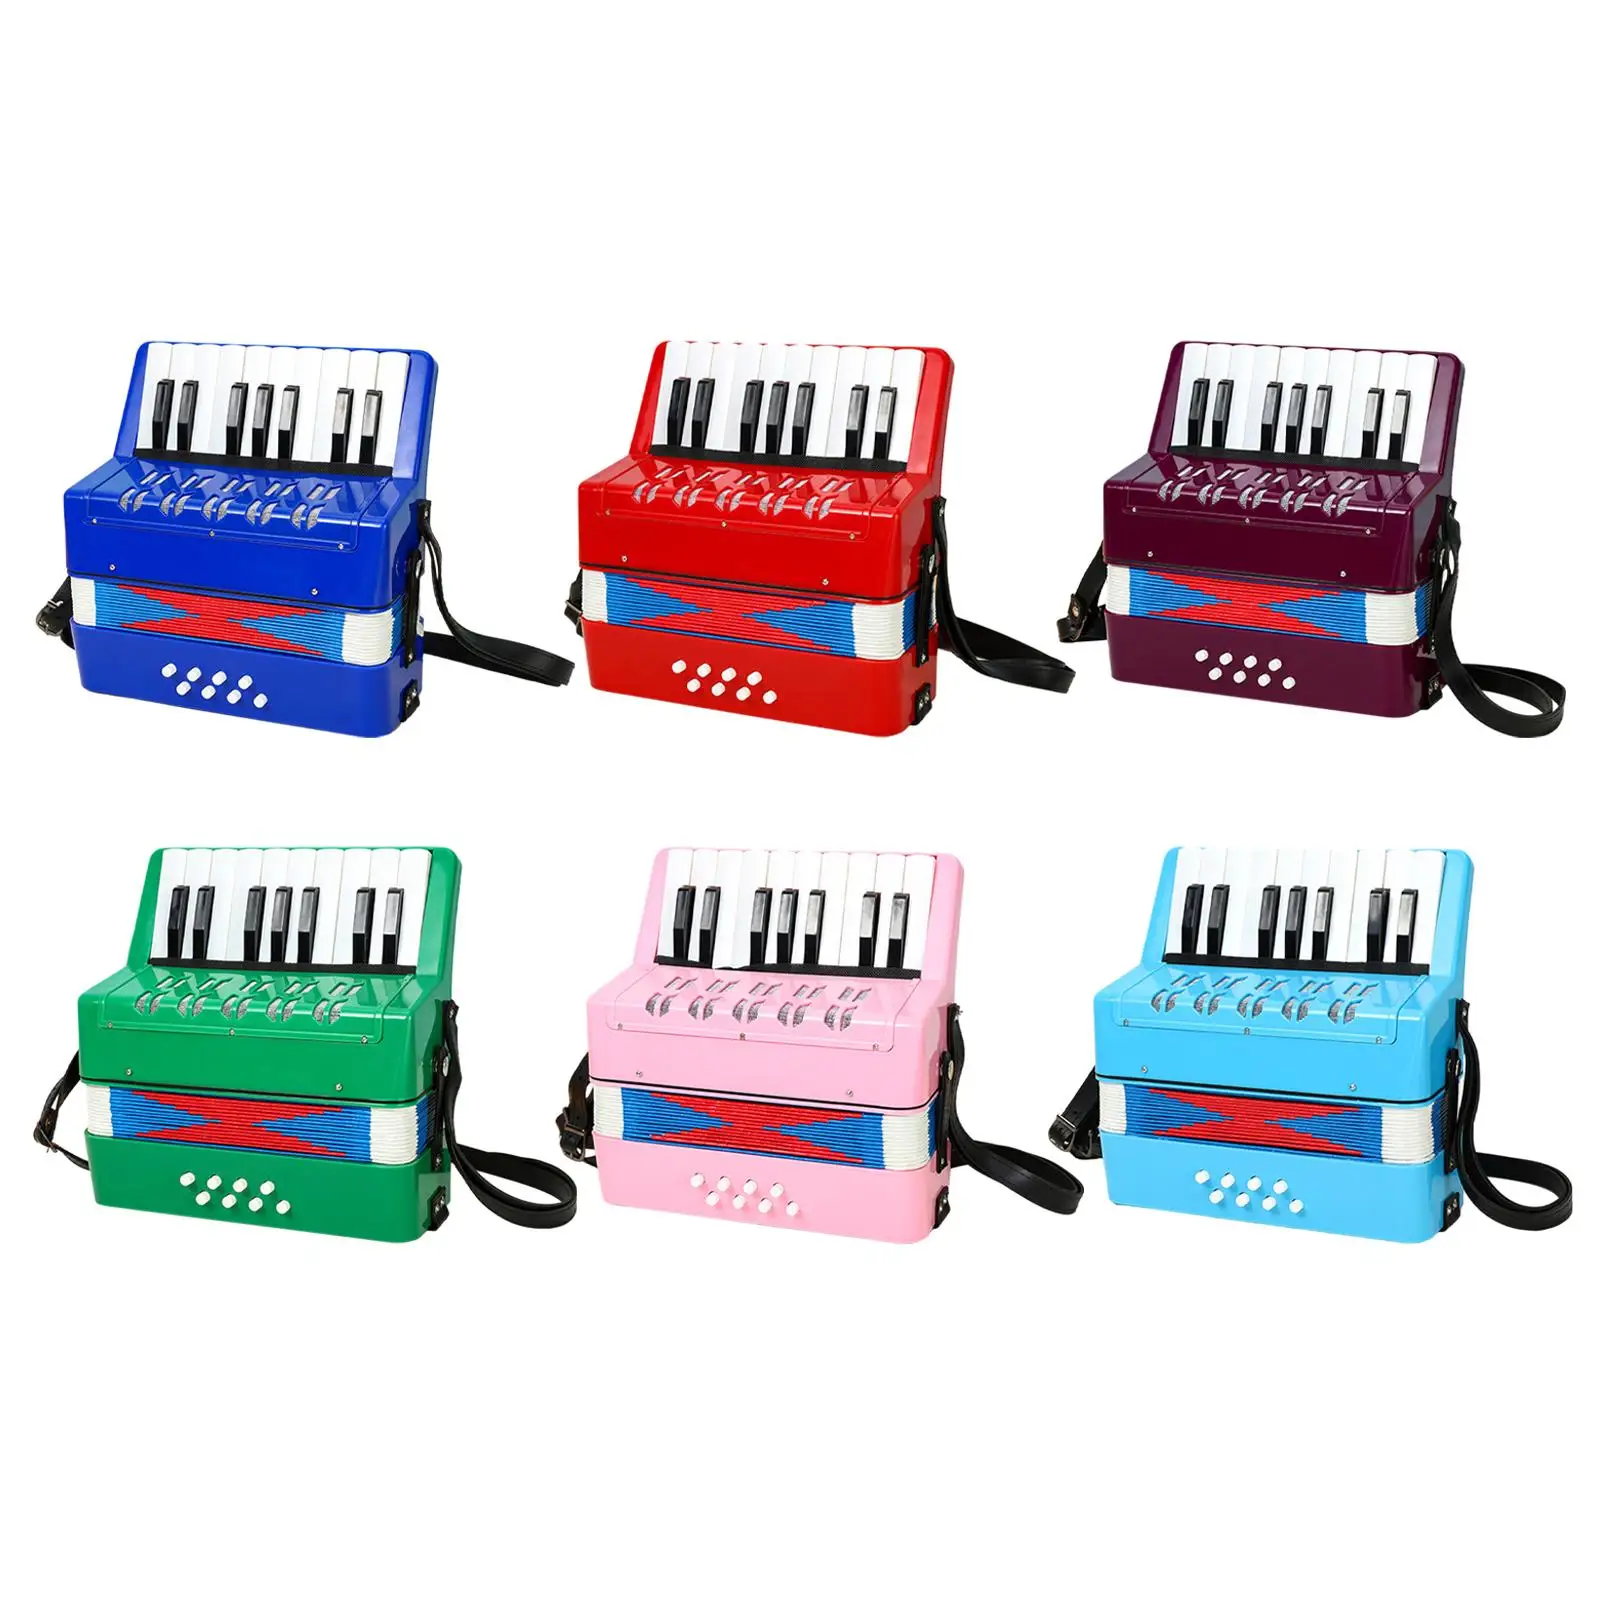 

17 Keys 8 Bass Piano Accordion Small Button Accordion Easy to Learn to Play Educational Musical Toys for Kids Birthday Gift